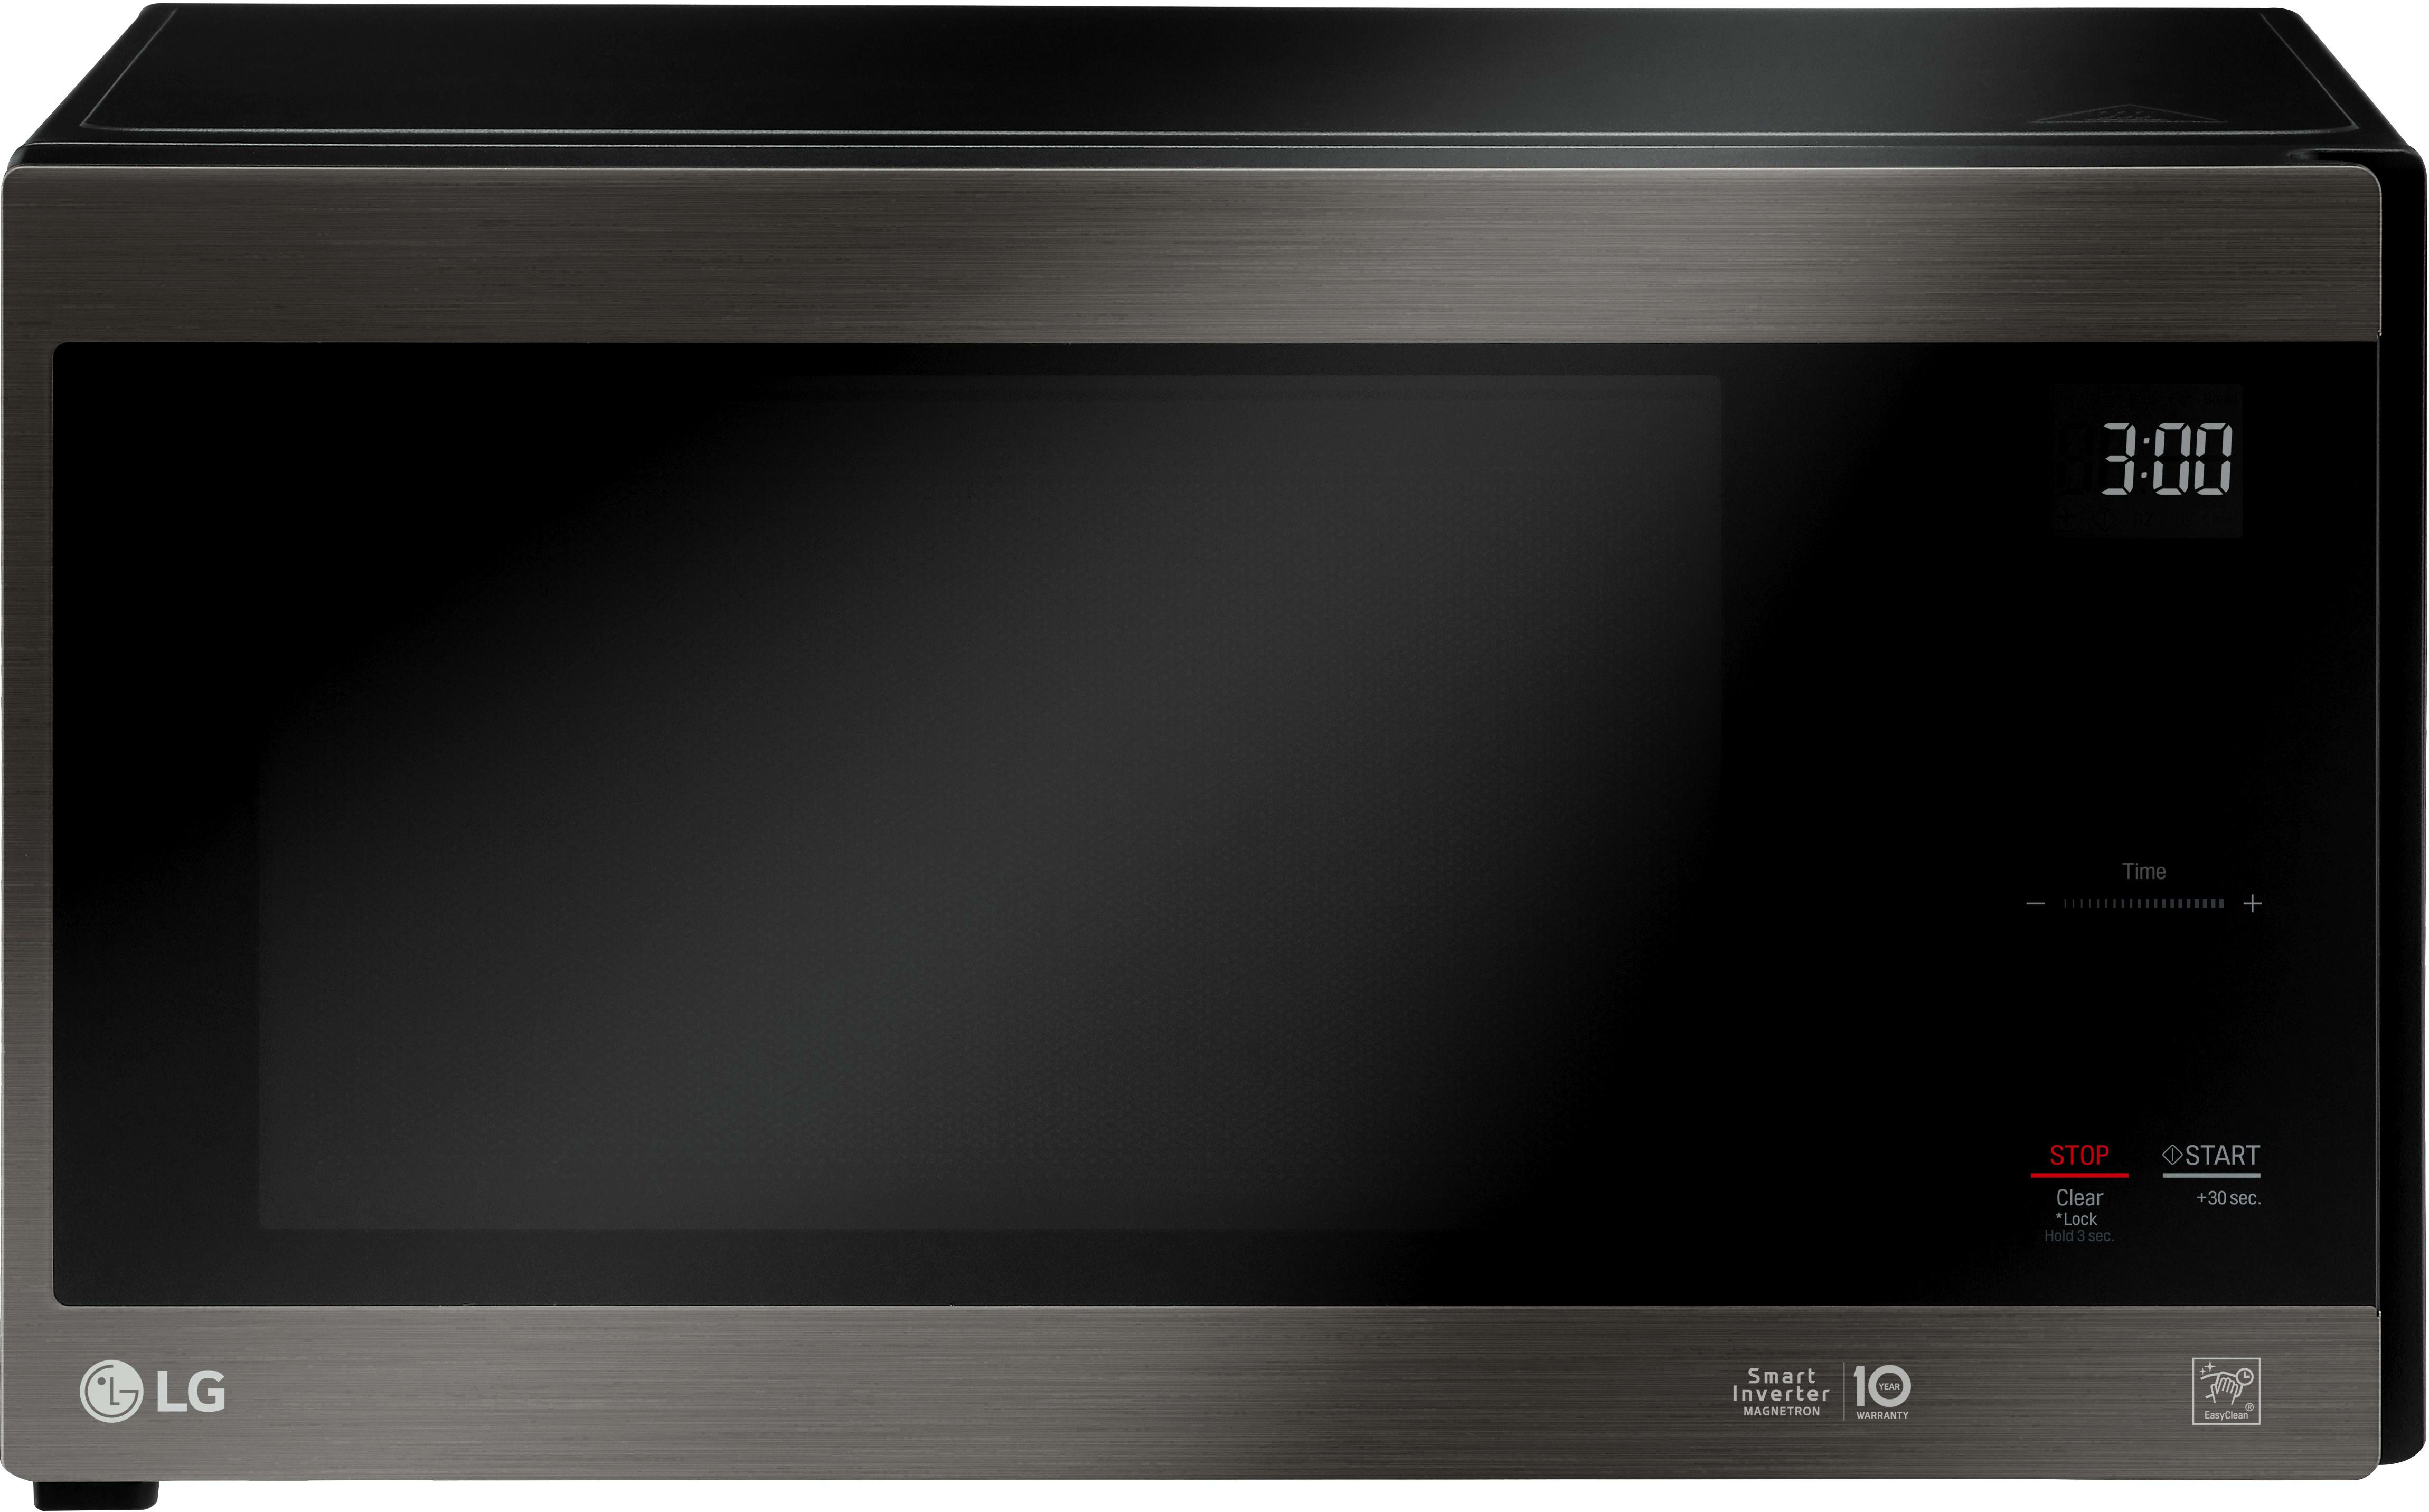 Lg Microwave Ovens Cooking Appliances, Lg Countertop Microwave